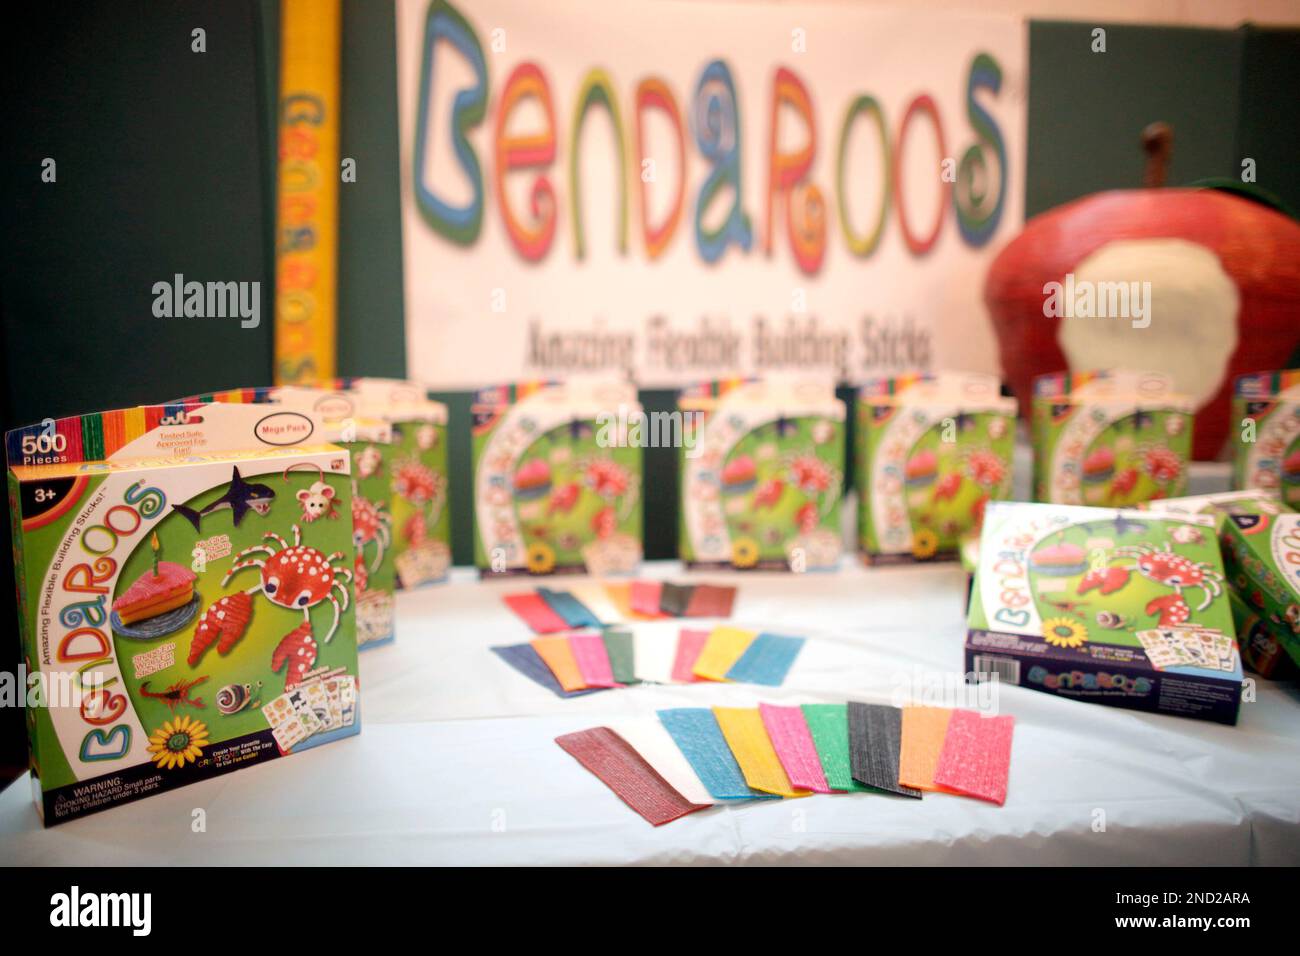 Bendaroos product is seen at the New York Parks & Recreation's Jackie  Robinson Recreation Center during a contest to build an Empire State  Building made entirely out of Bendaroos building sticks, Thursday